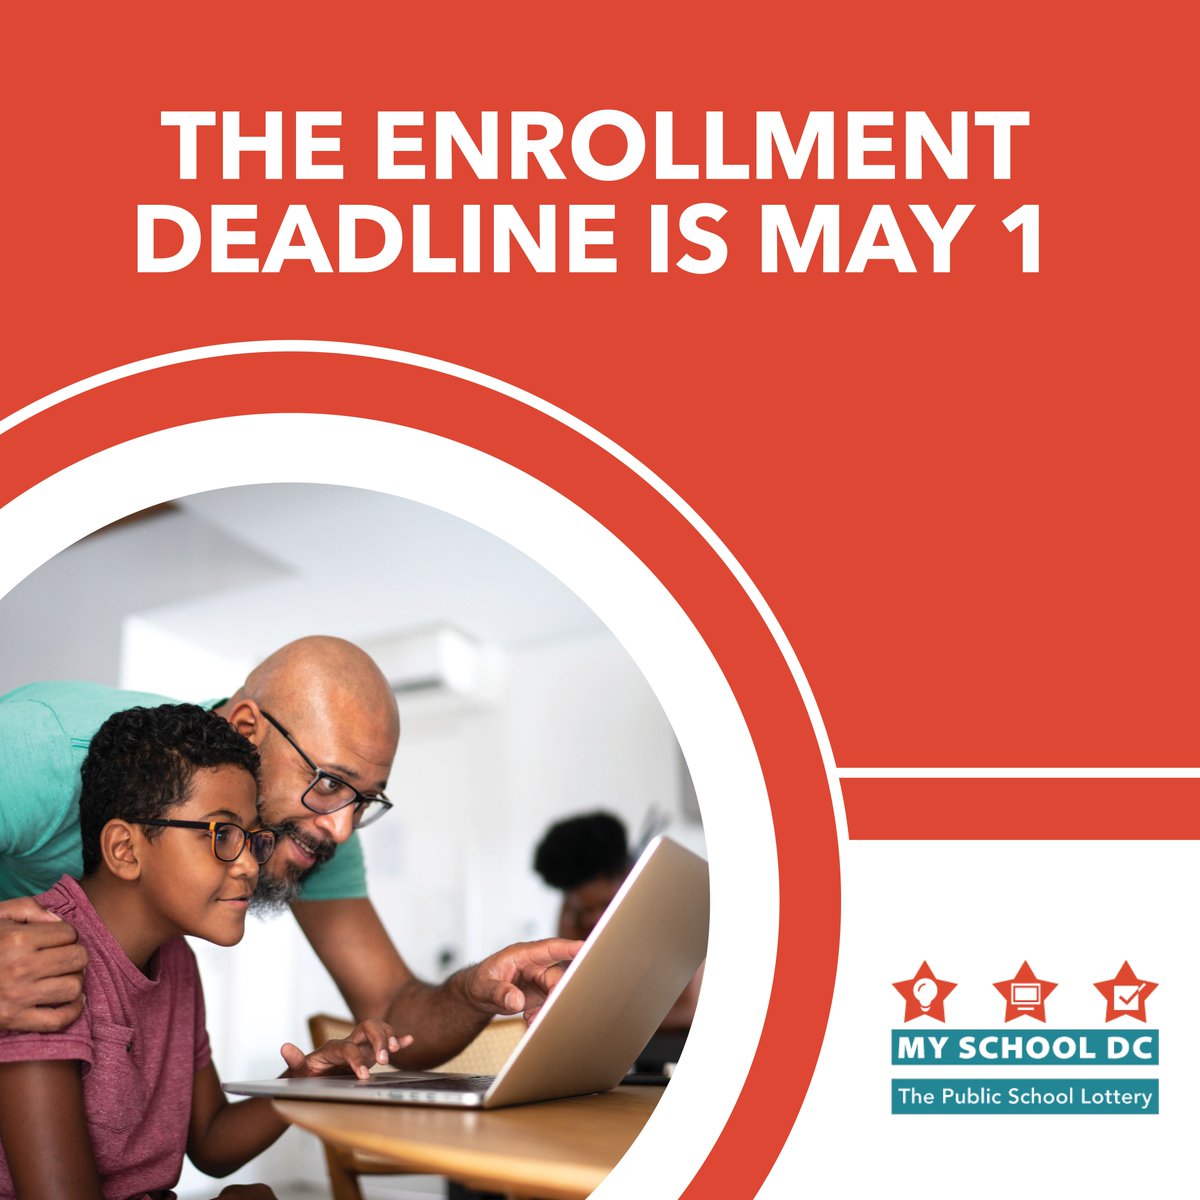 If your student was matched through the My School DC lottery, you must enroll in the school by May 1 to secure their space. Get all the info you’ll need to start the enrollment process here: buff.ly/41K2g2y